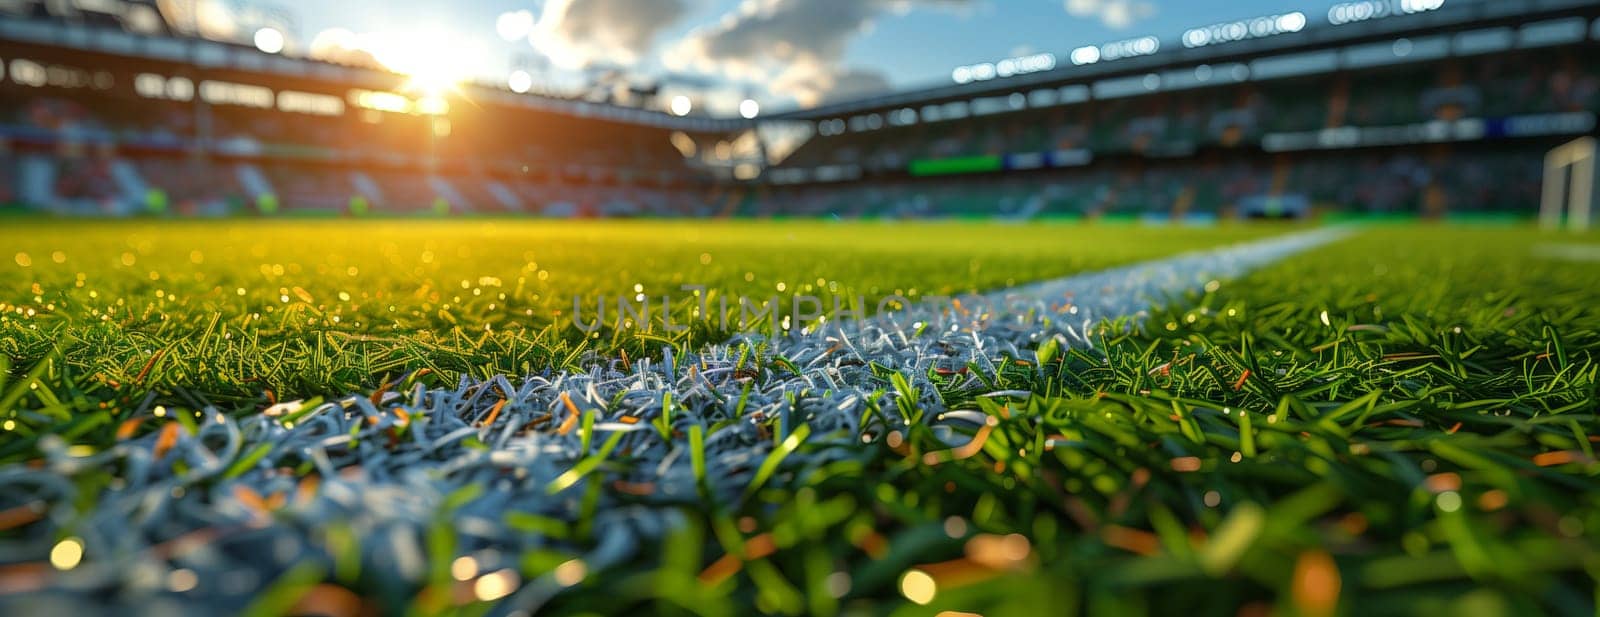 A close up of a grassland soccer field with the sun shining through the clouds, creating a picturesque natural landscape